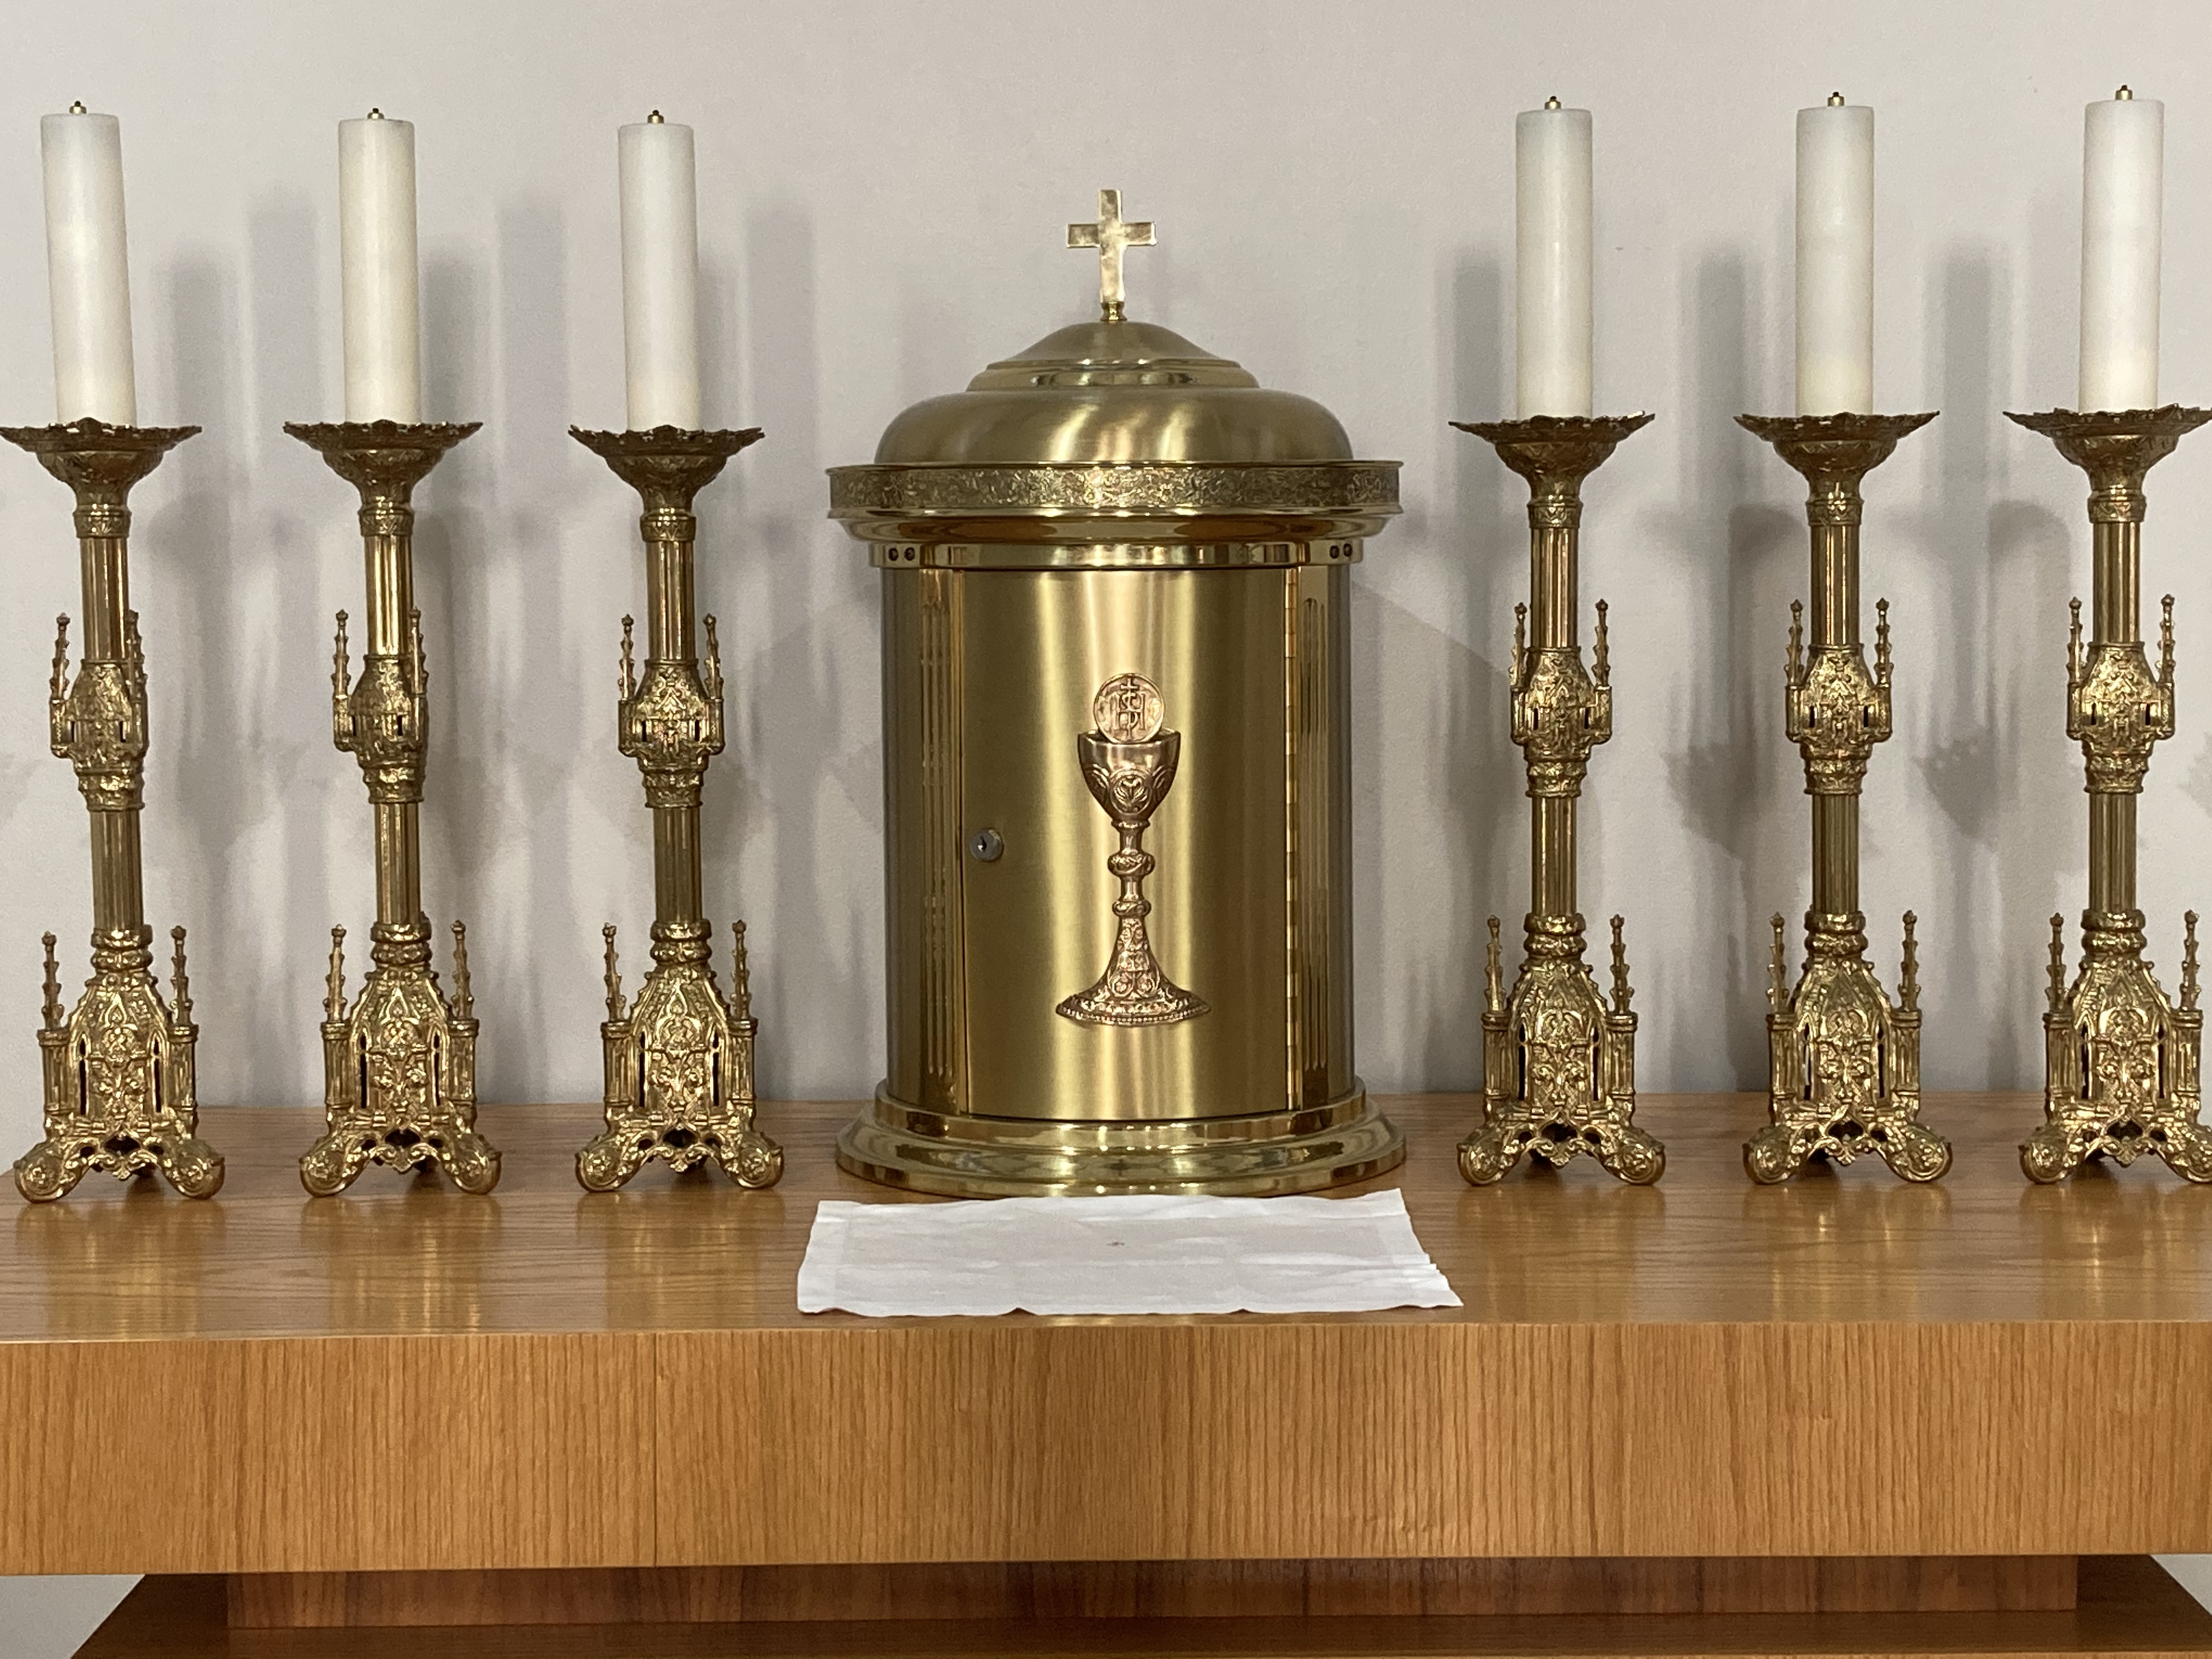 Image of gold tabernacle with three white candles on a golden stand on either side. This is all placed on a wooden table